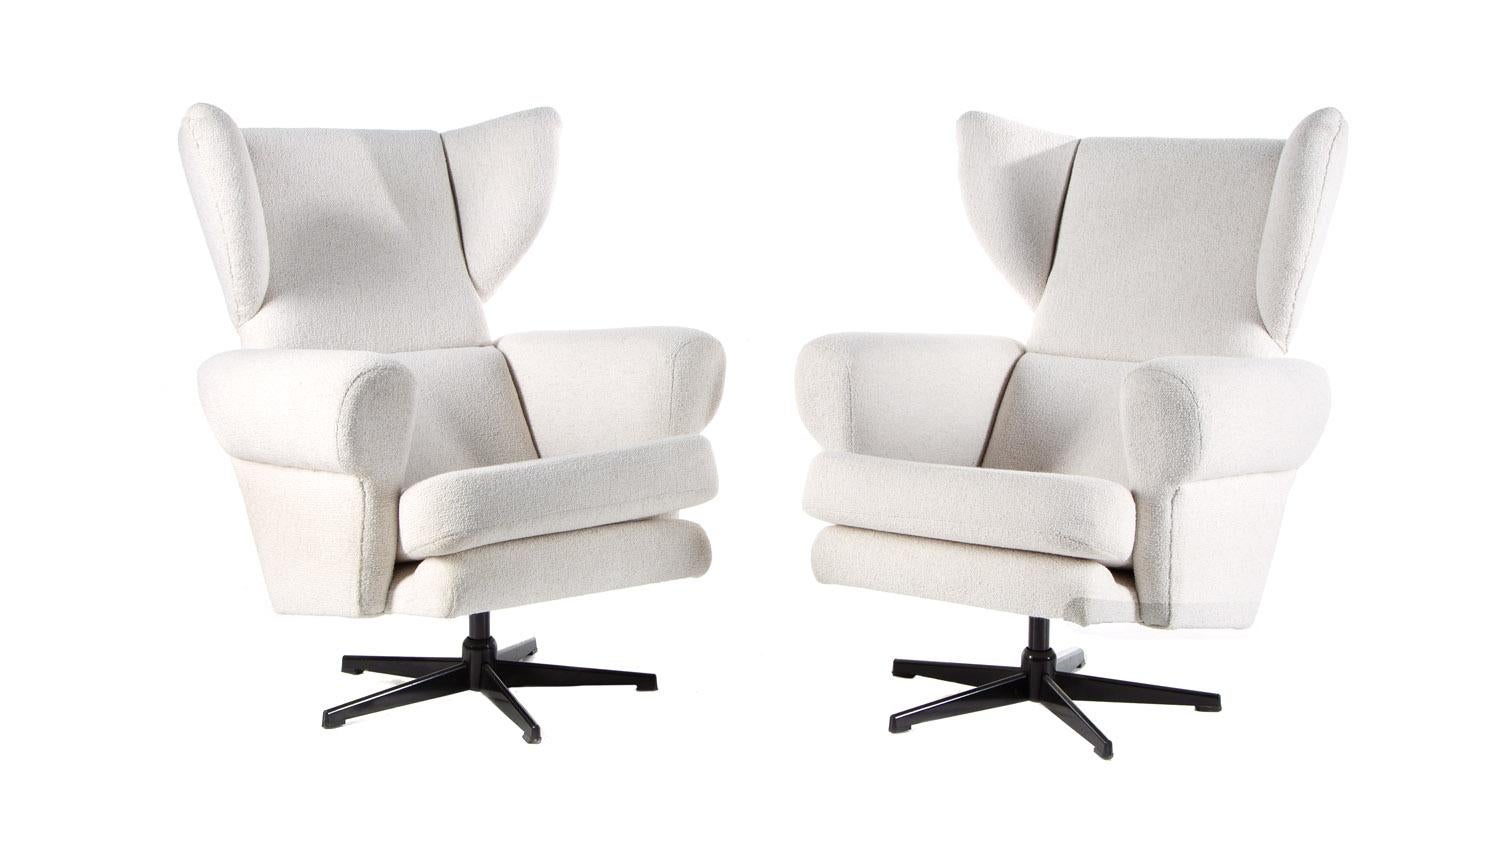 Fabric A set of 2 armchairs For Sale